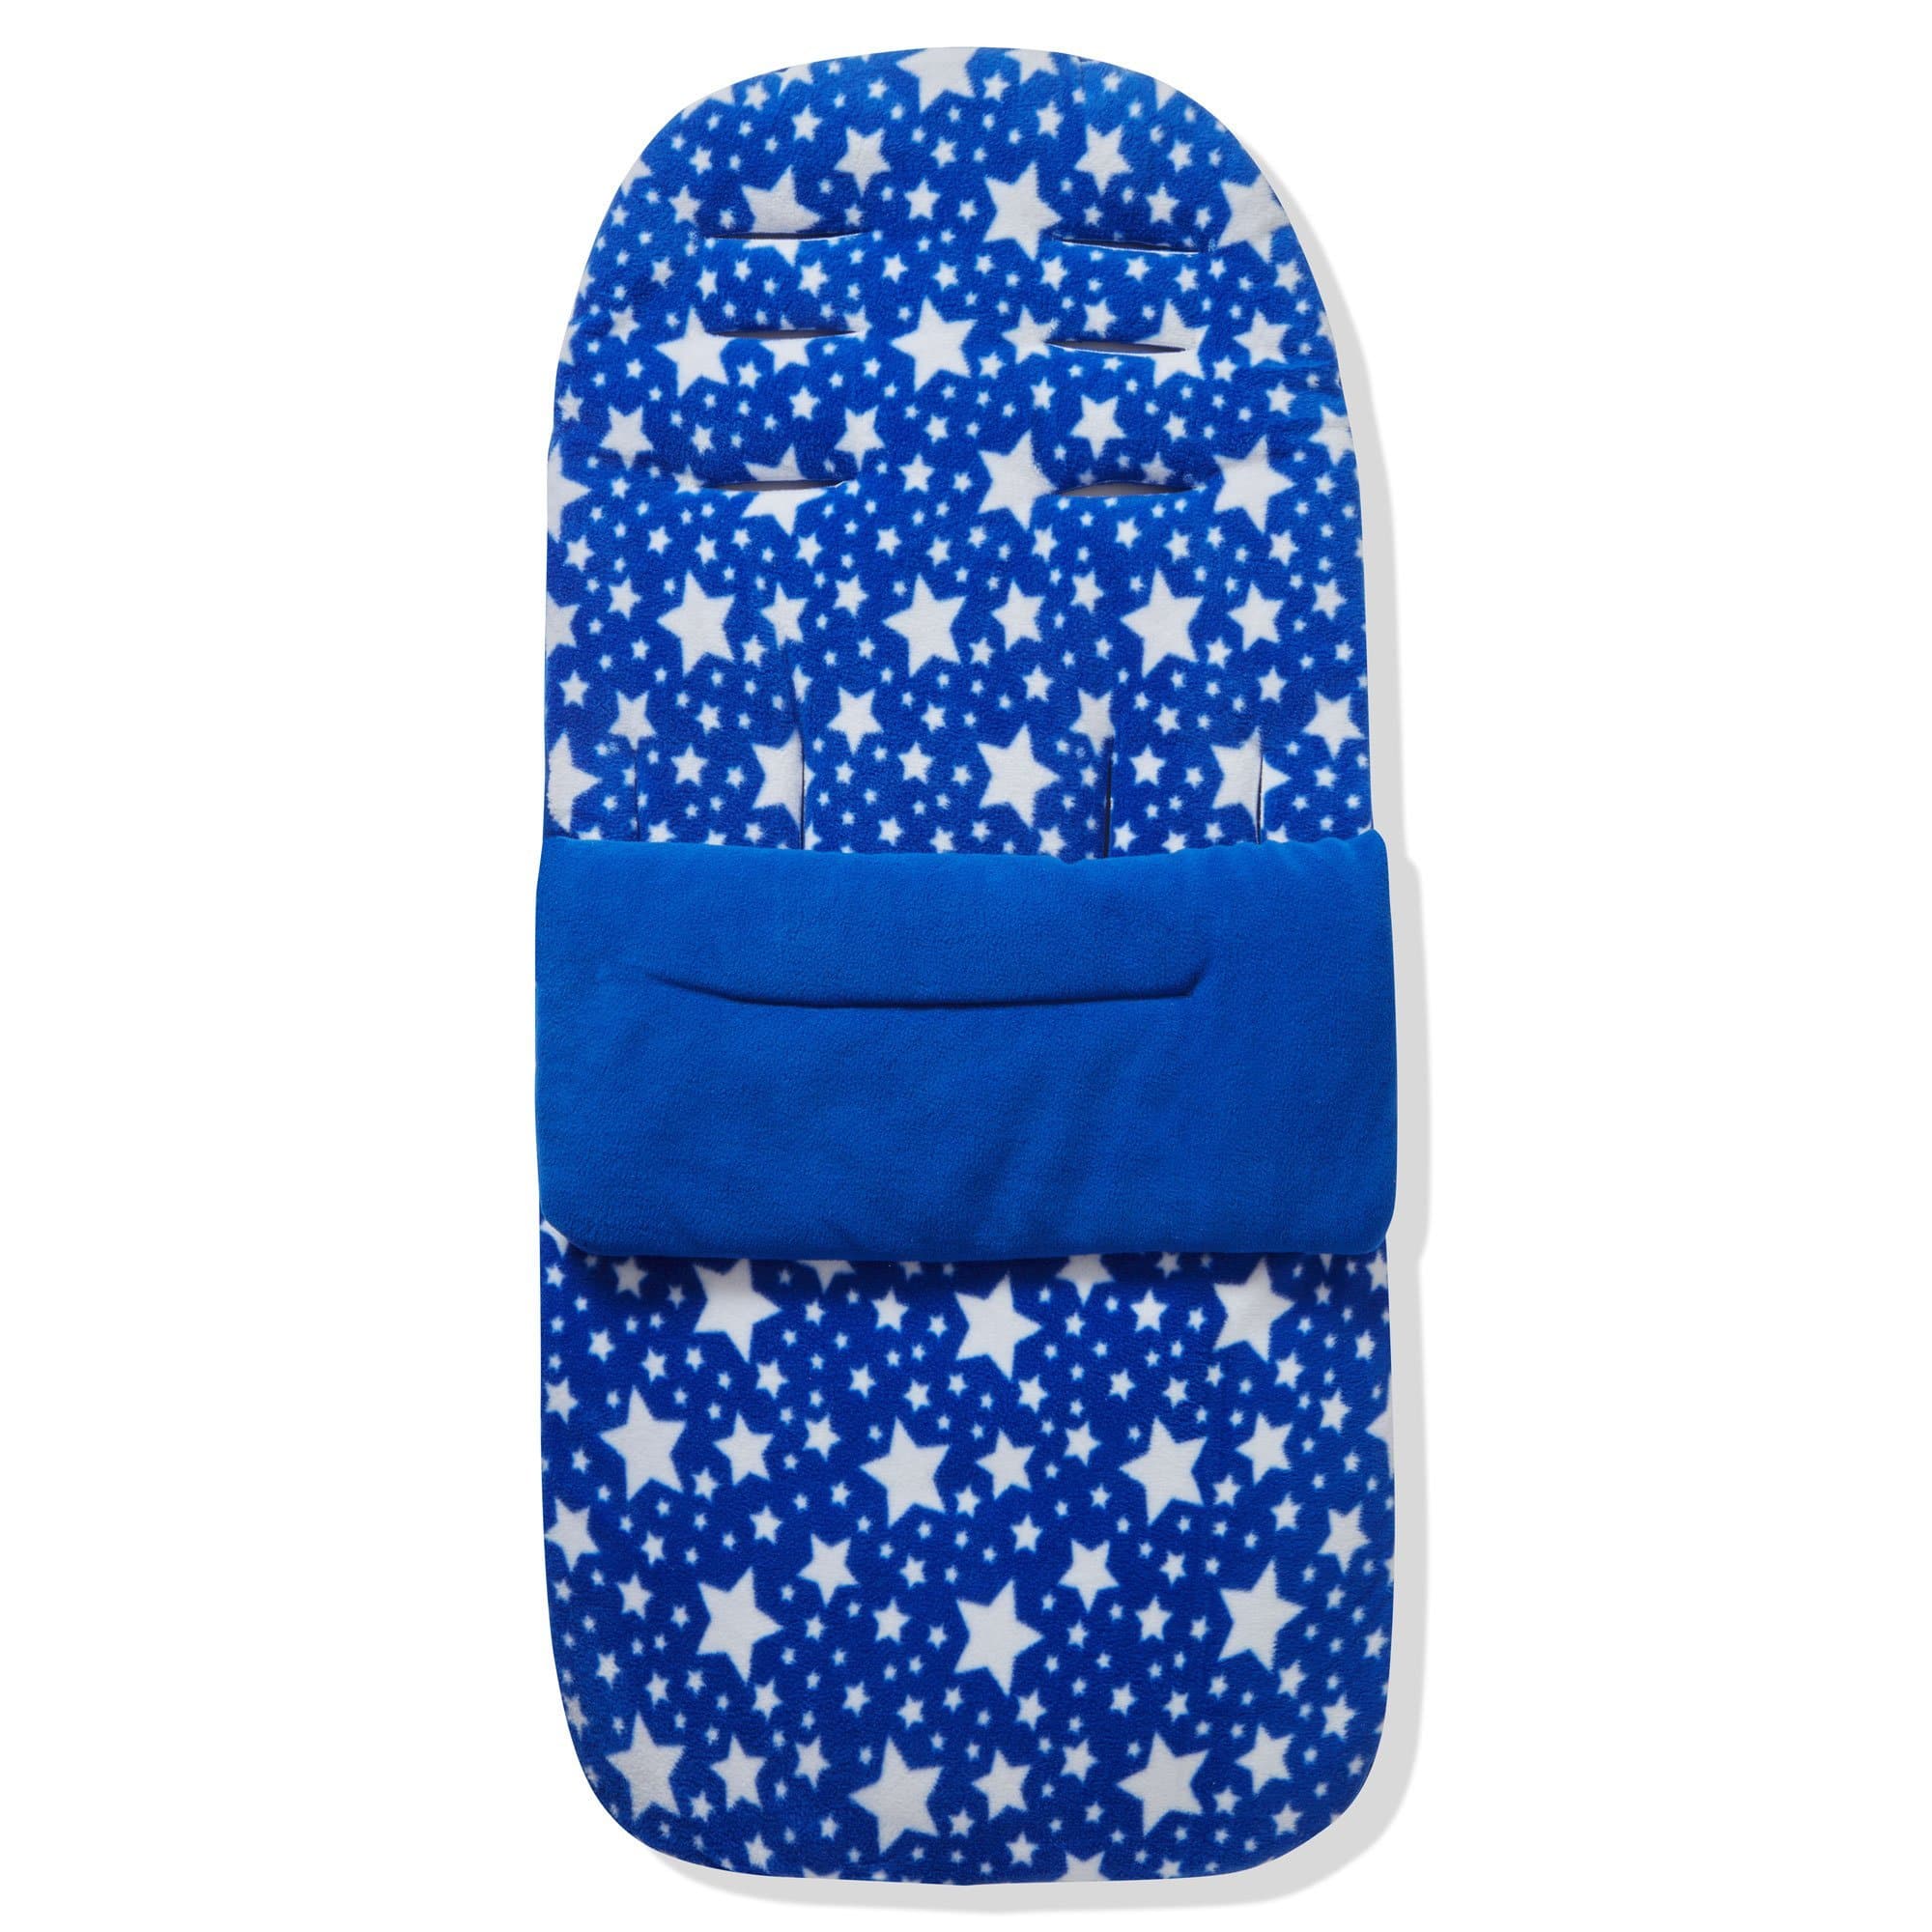 Fleece Footmuff / Cosy Toes Compatible with Recaro - Blue Star / Fits All Models | For Your Little One